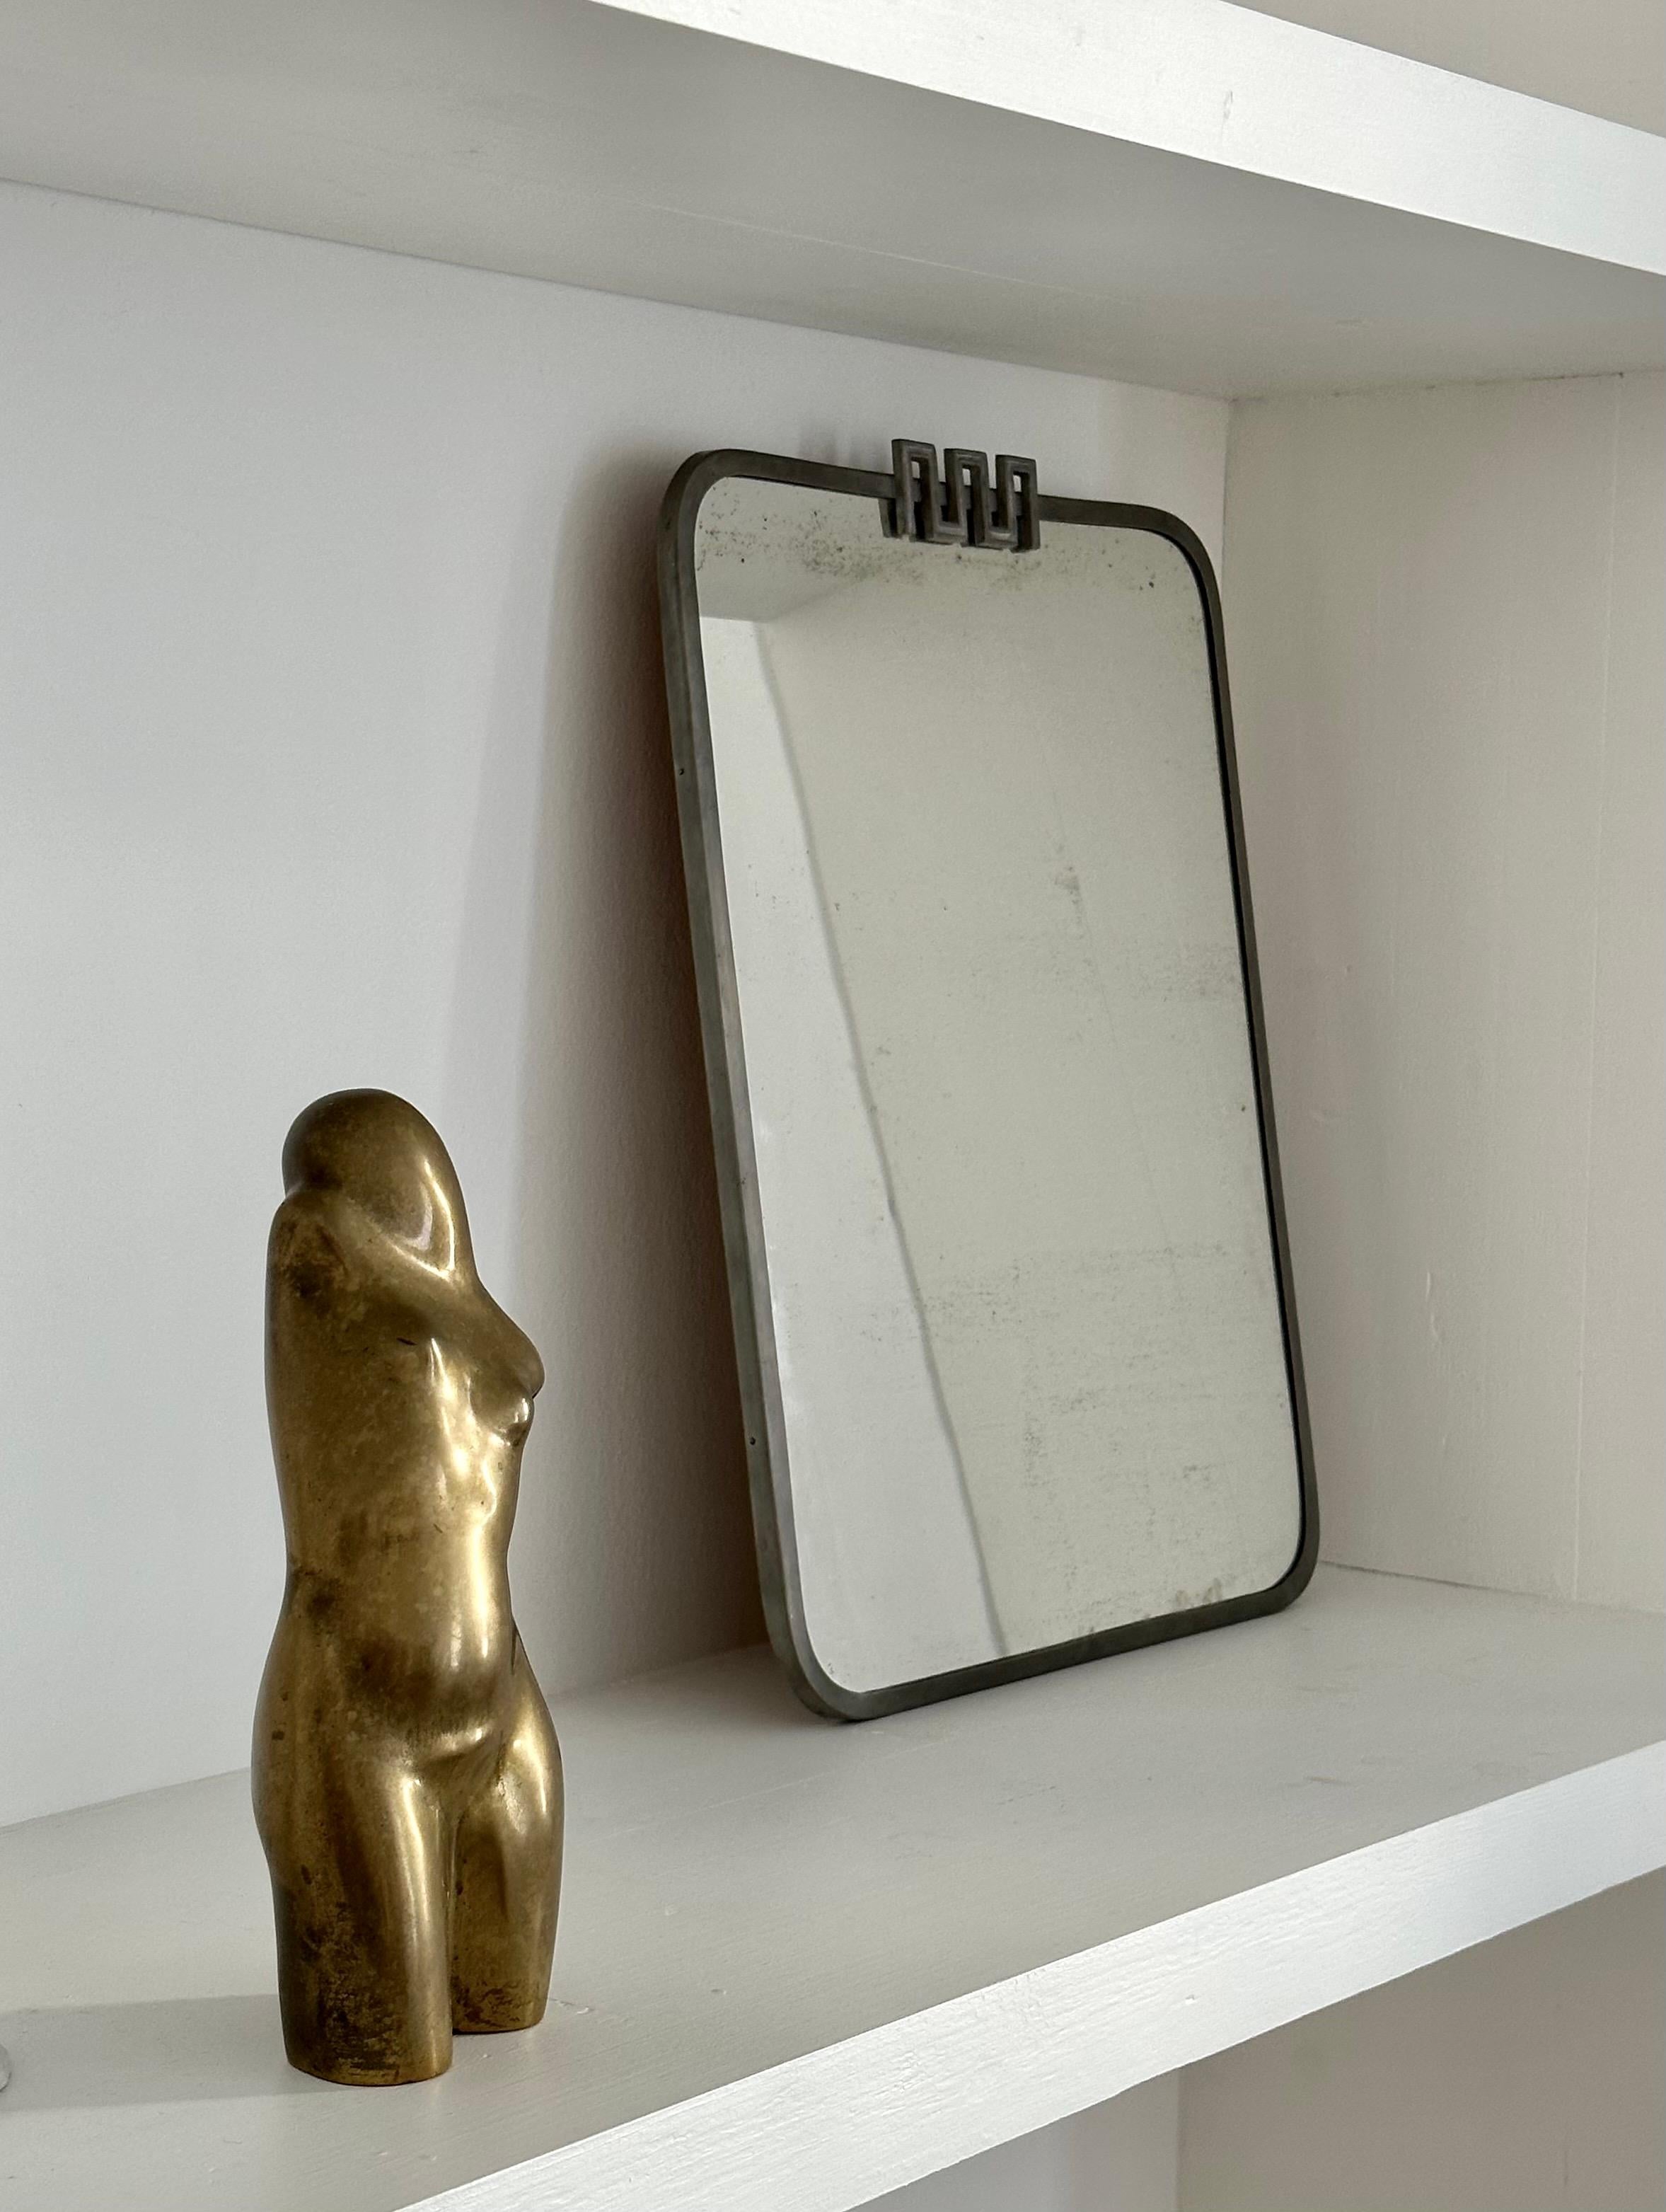 Scandinavian Modern Pewter Mirror designed by Nils Fougstedt and made by FAK, 1933, Sweden